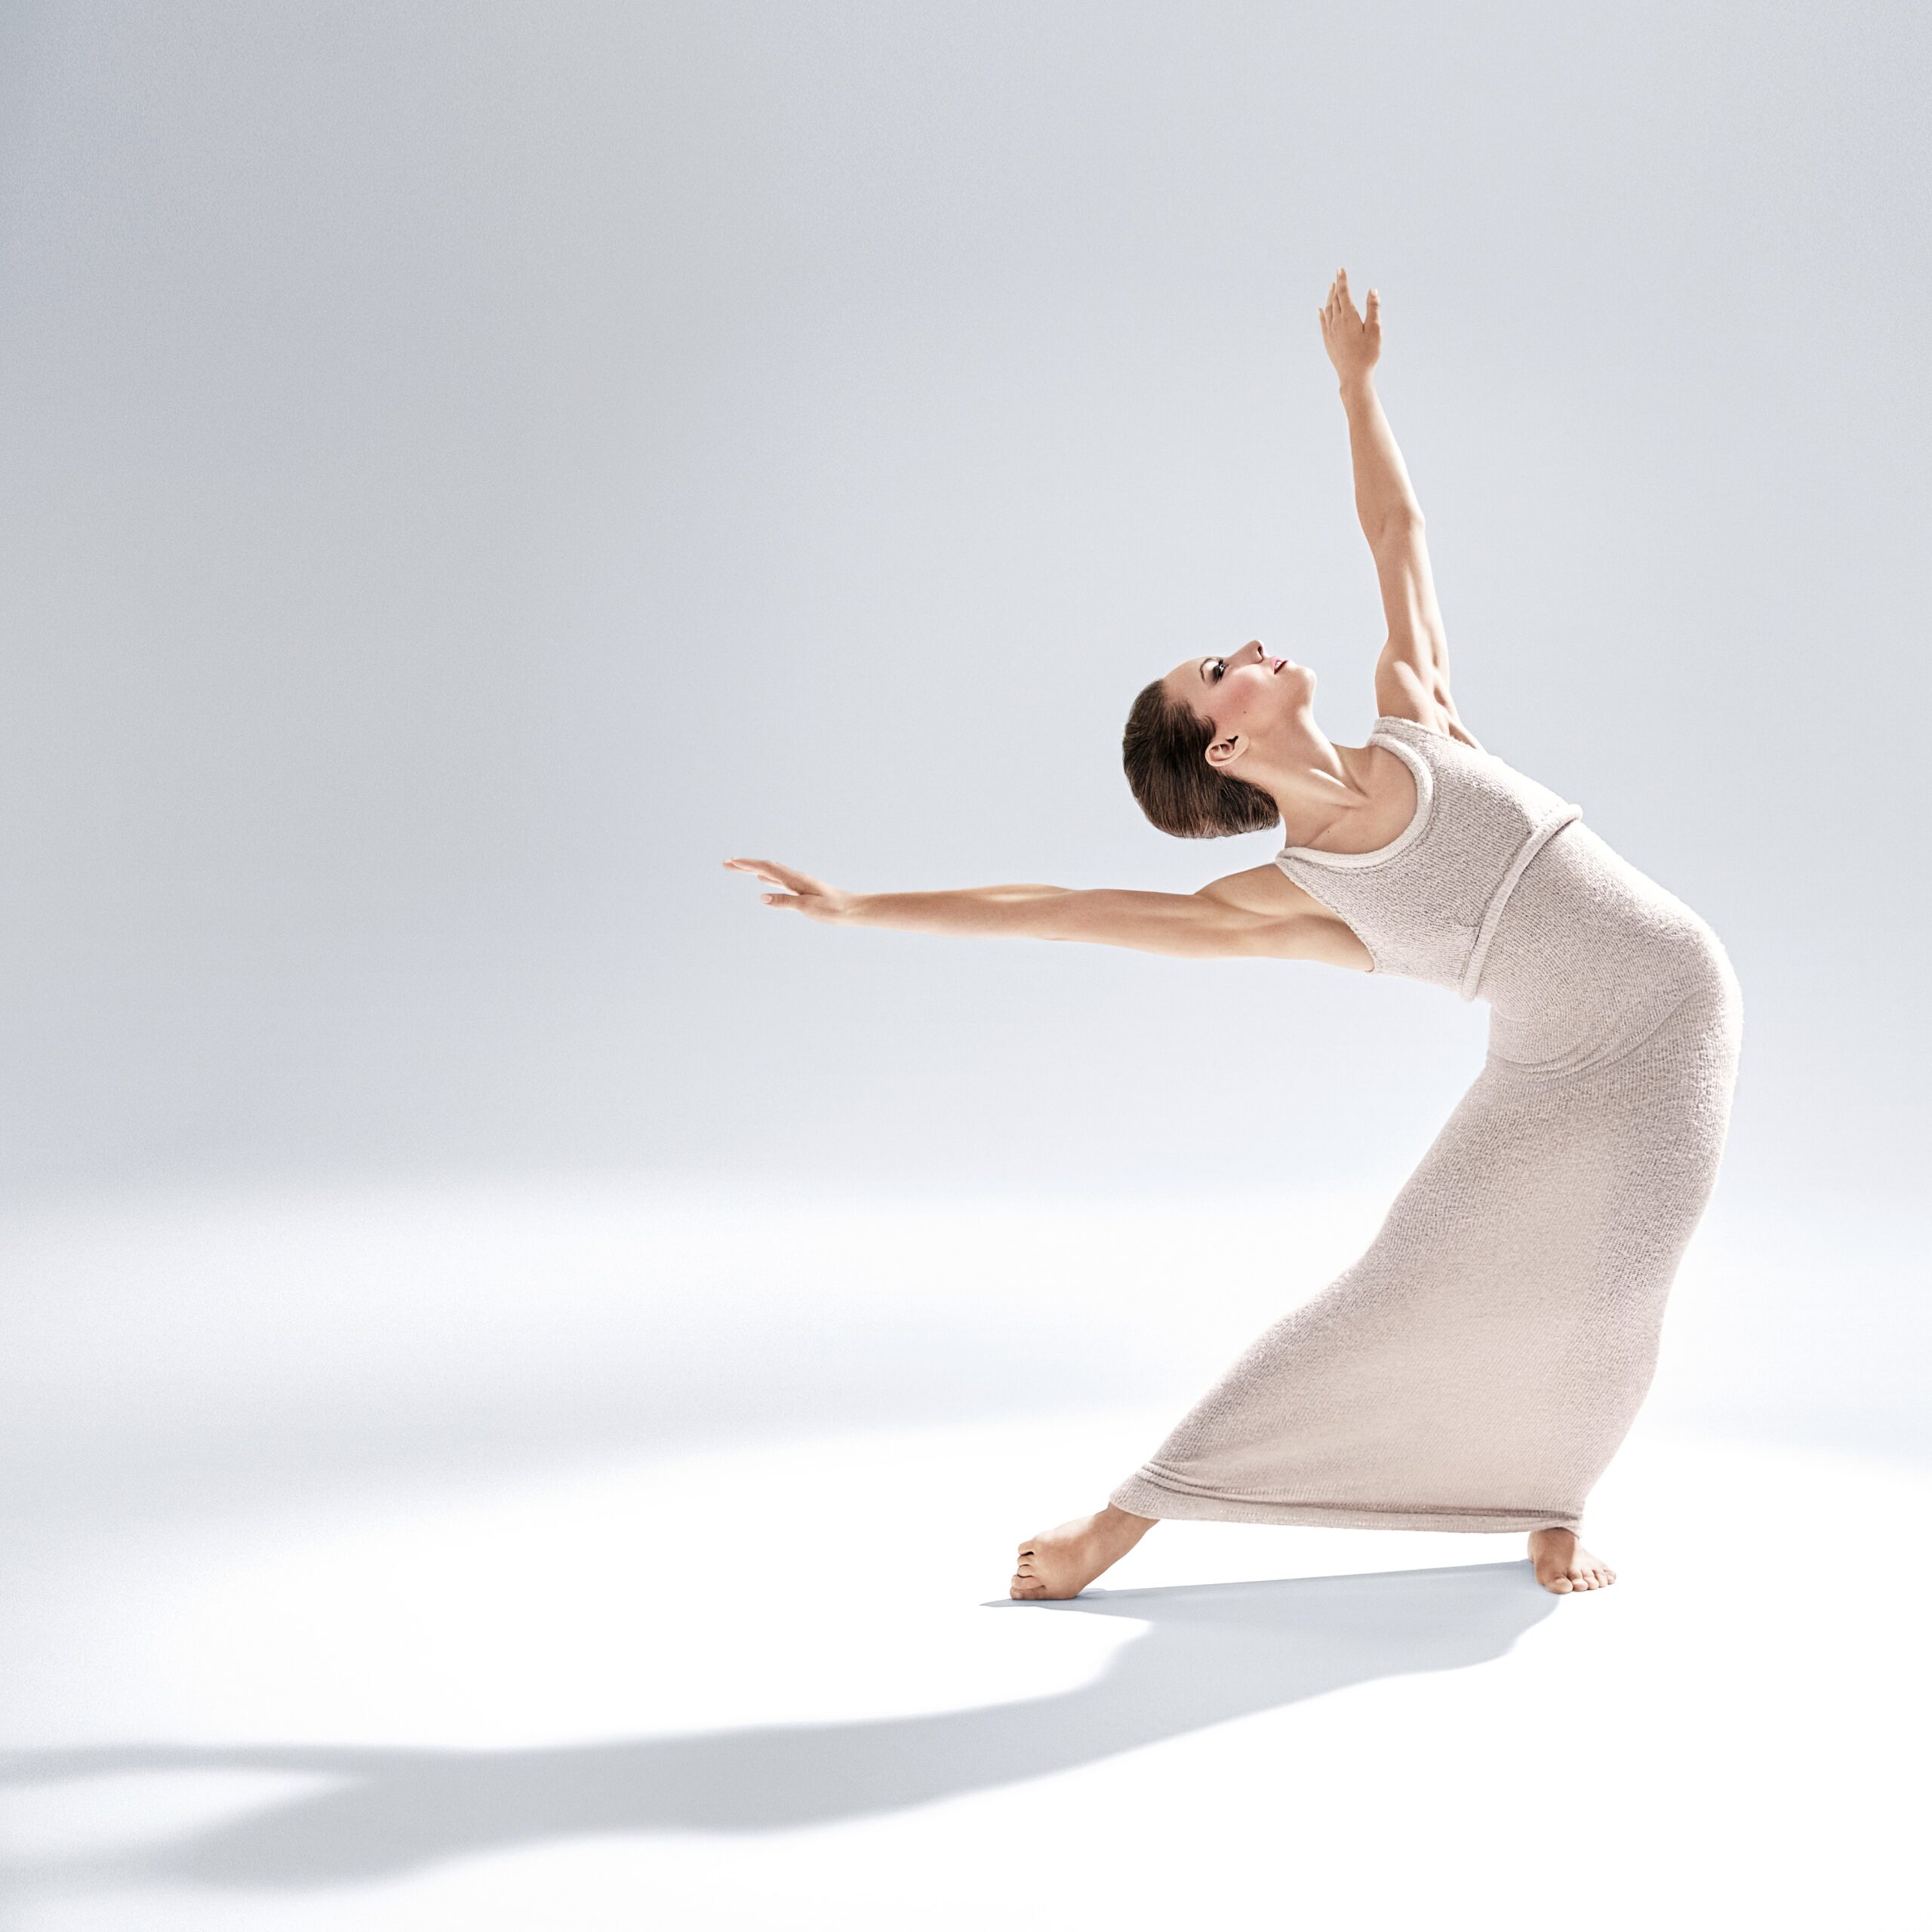 a female dancer wearing an ankle length white dress hinging from her wait with her arms out wide